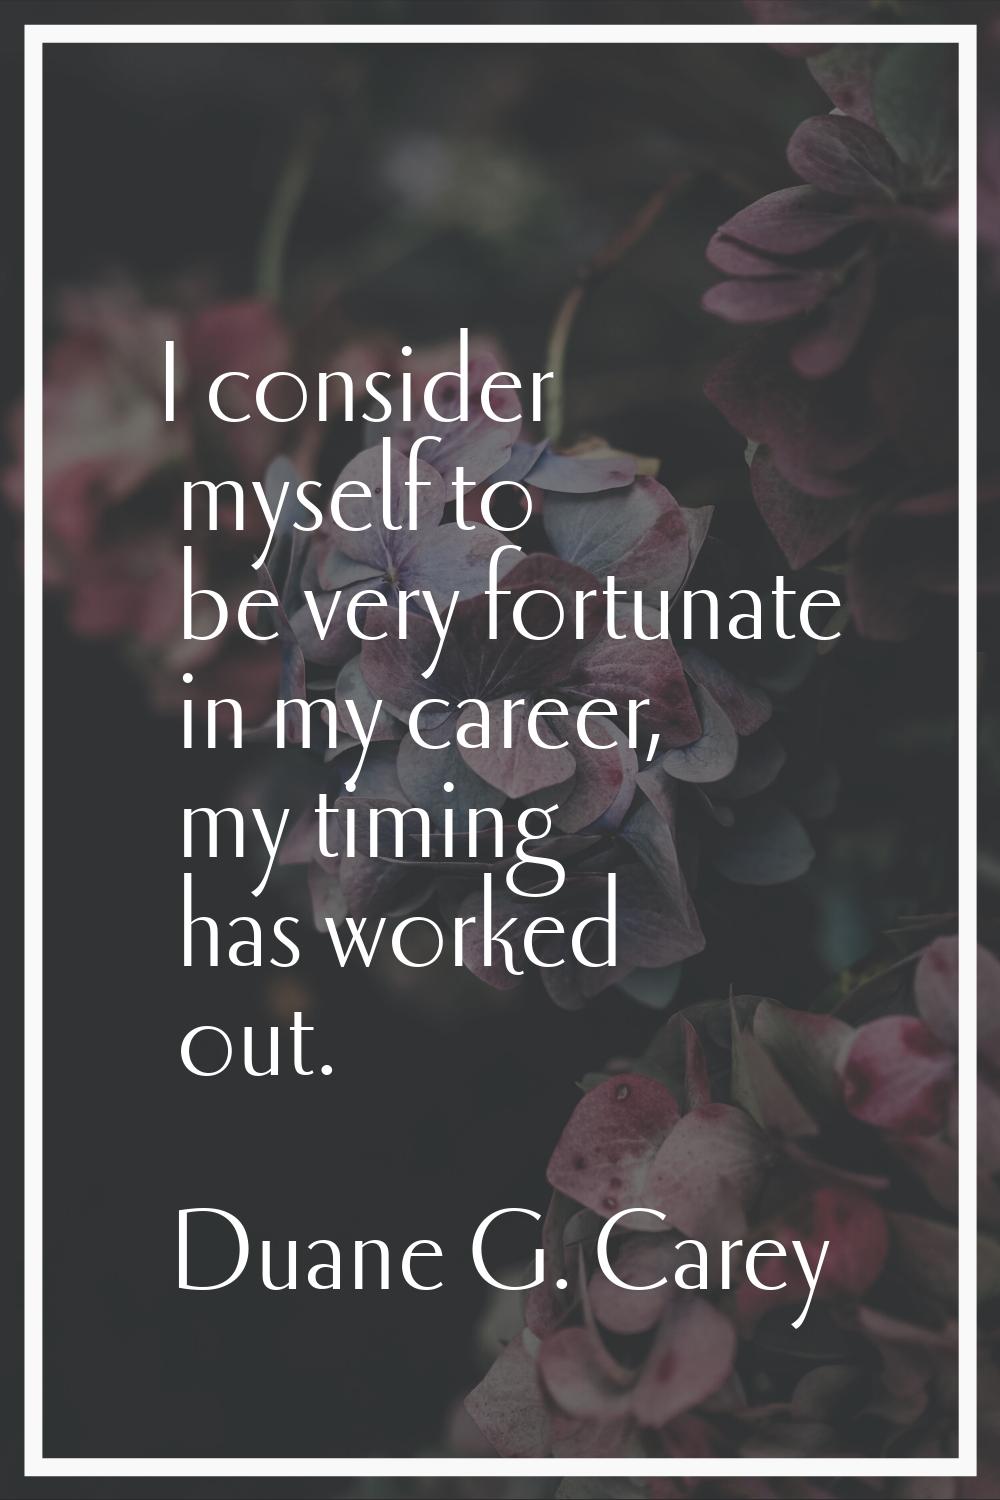 I consider myself to be very fortunate in my career, my timing has worked out.